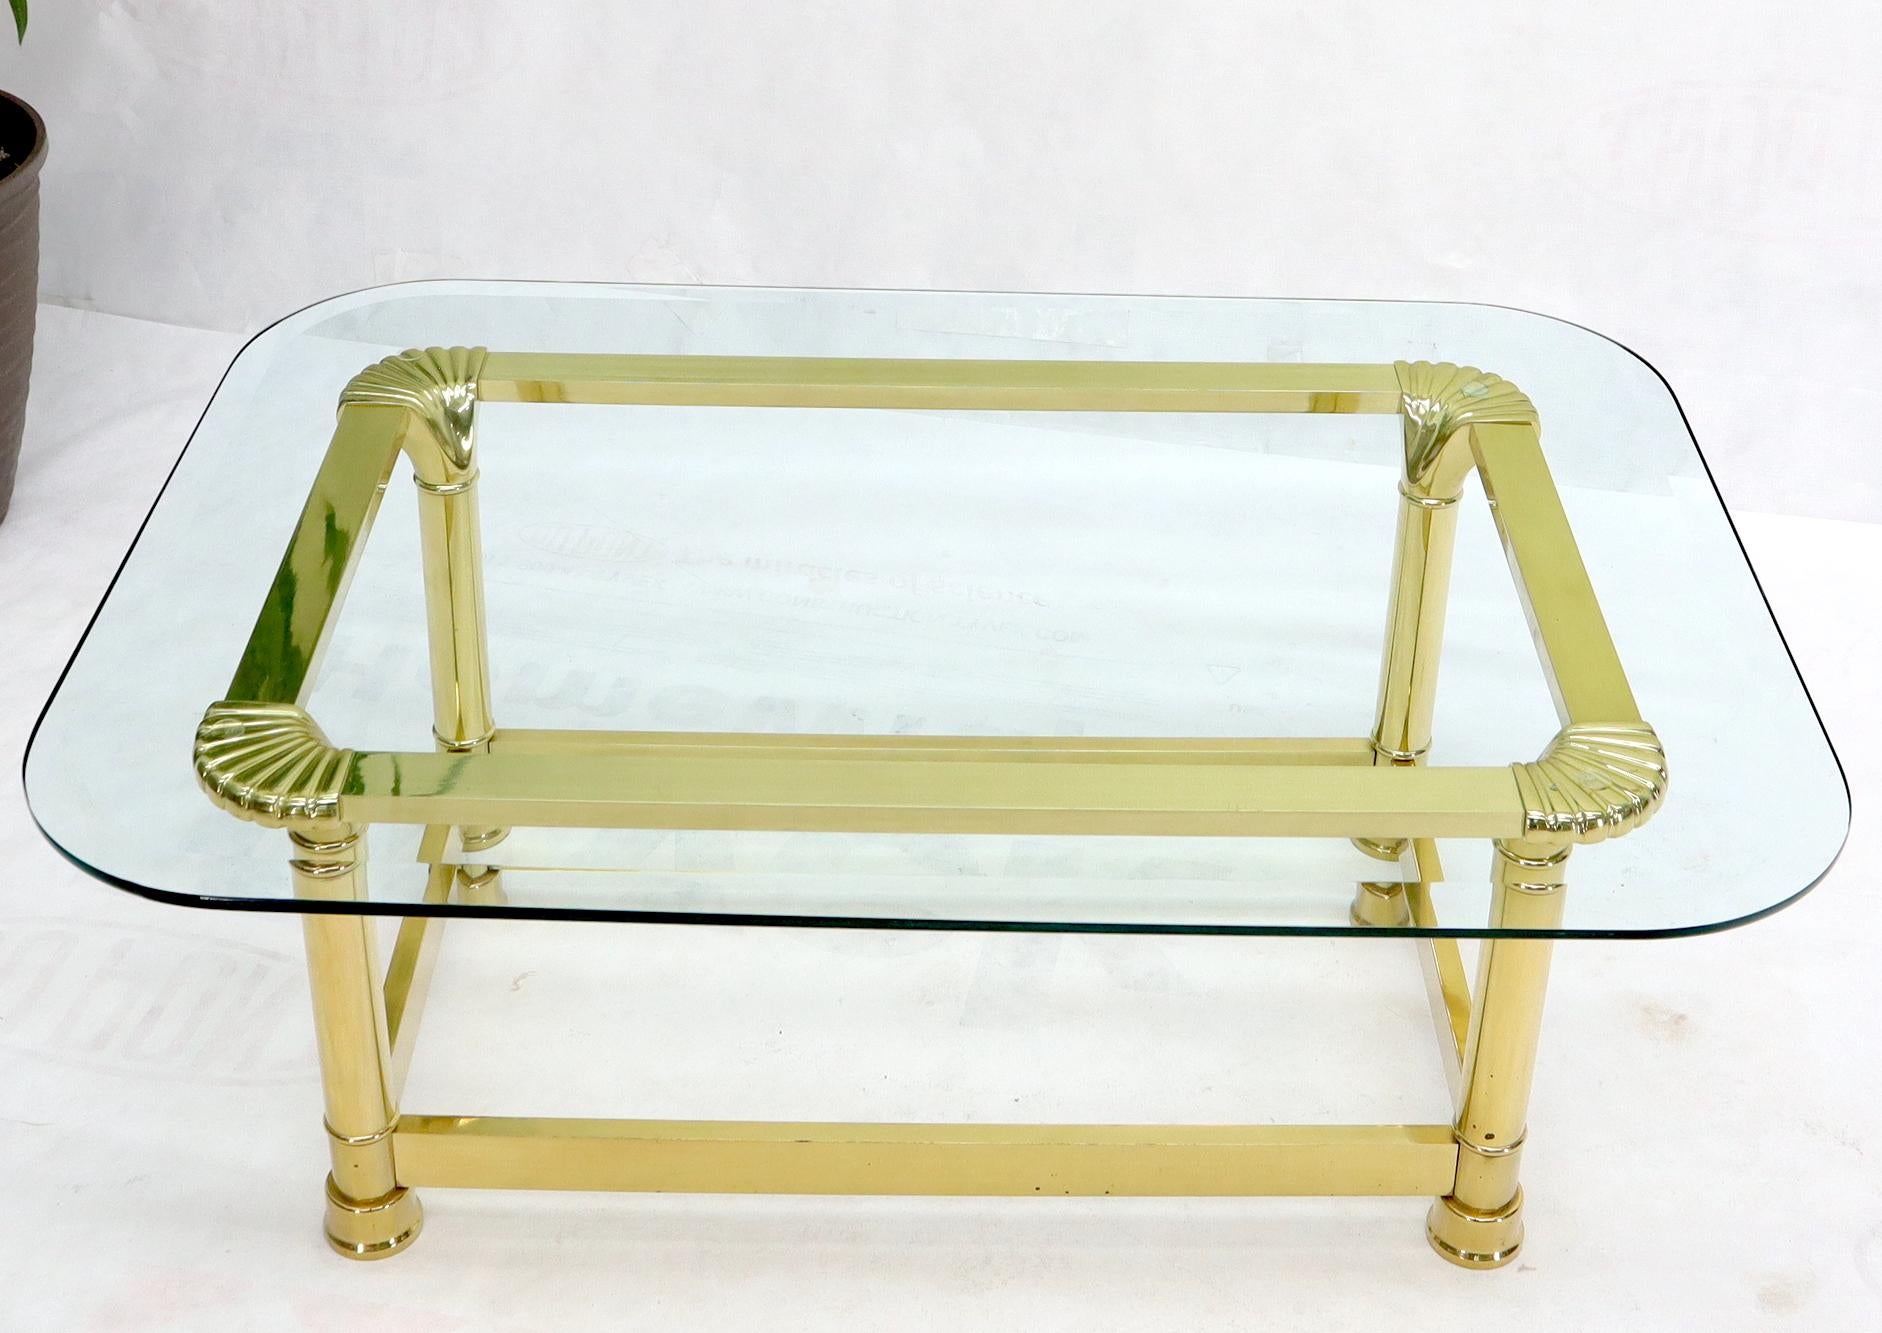 Vintage Italian polished brass bass rectangular glass top coffee table with rounded scallop shape corners.